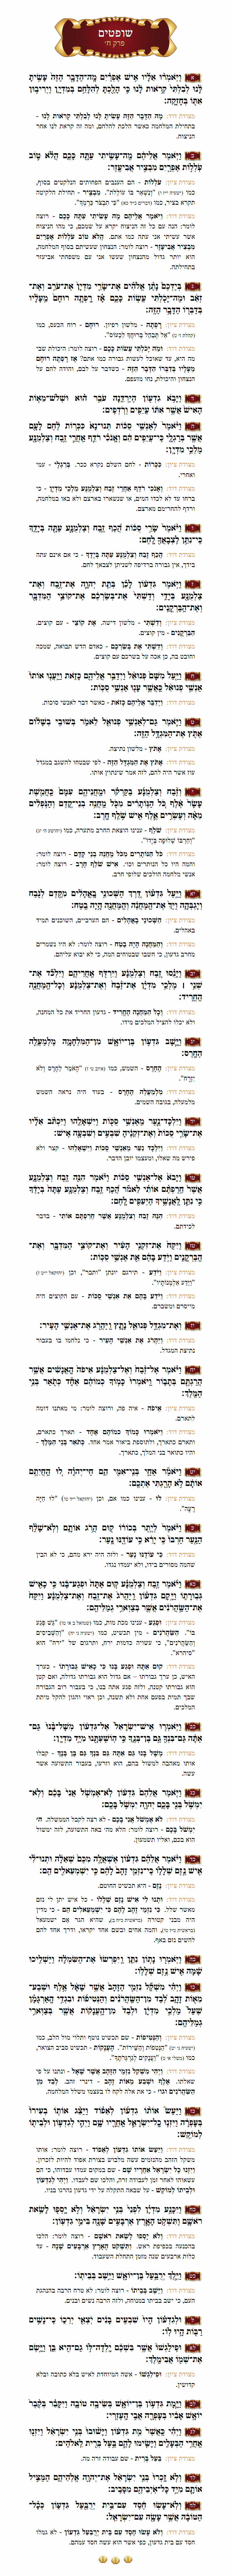 Sefer Shoftim Chapter 8 with commentary